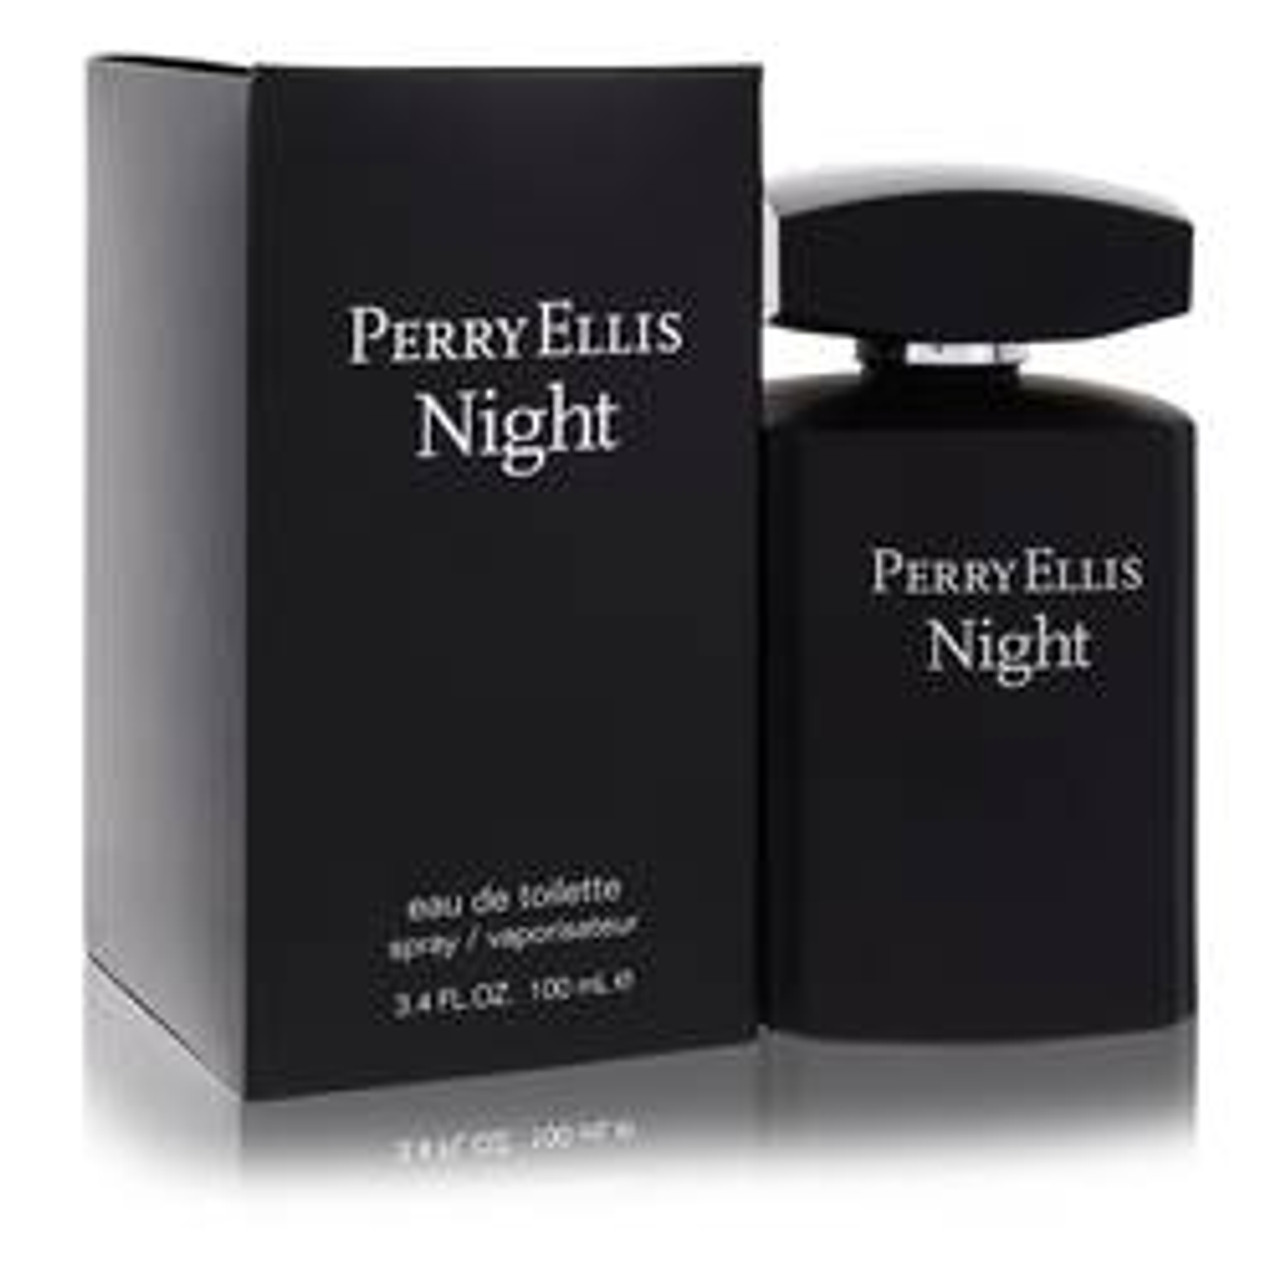 Perry Ellis Night Cologne By Perry Ellis Eau De Toilette Spray 3.4 oz for Men - [From 59.00 - Choose pk Qty ] - *Ships from Miami